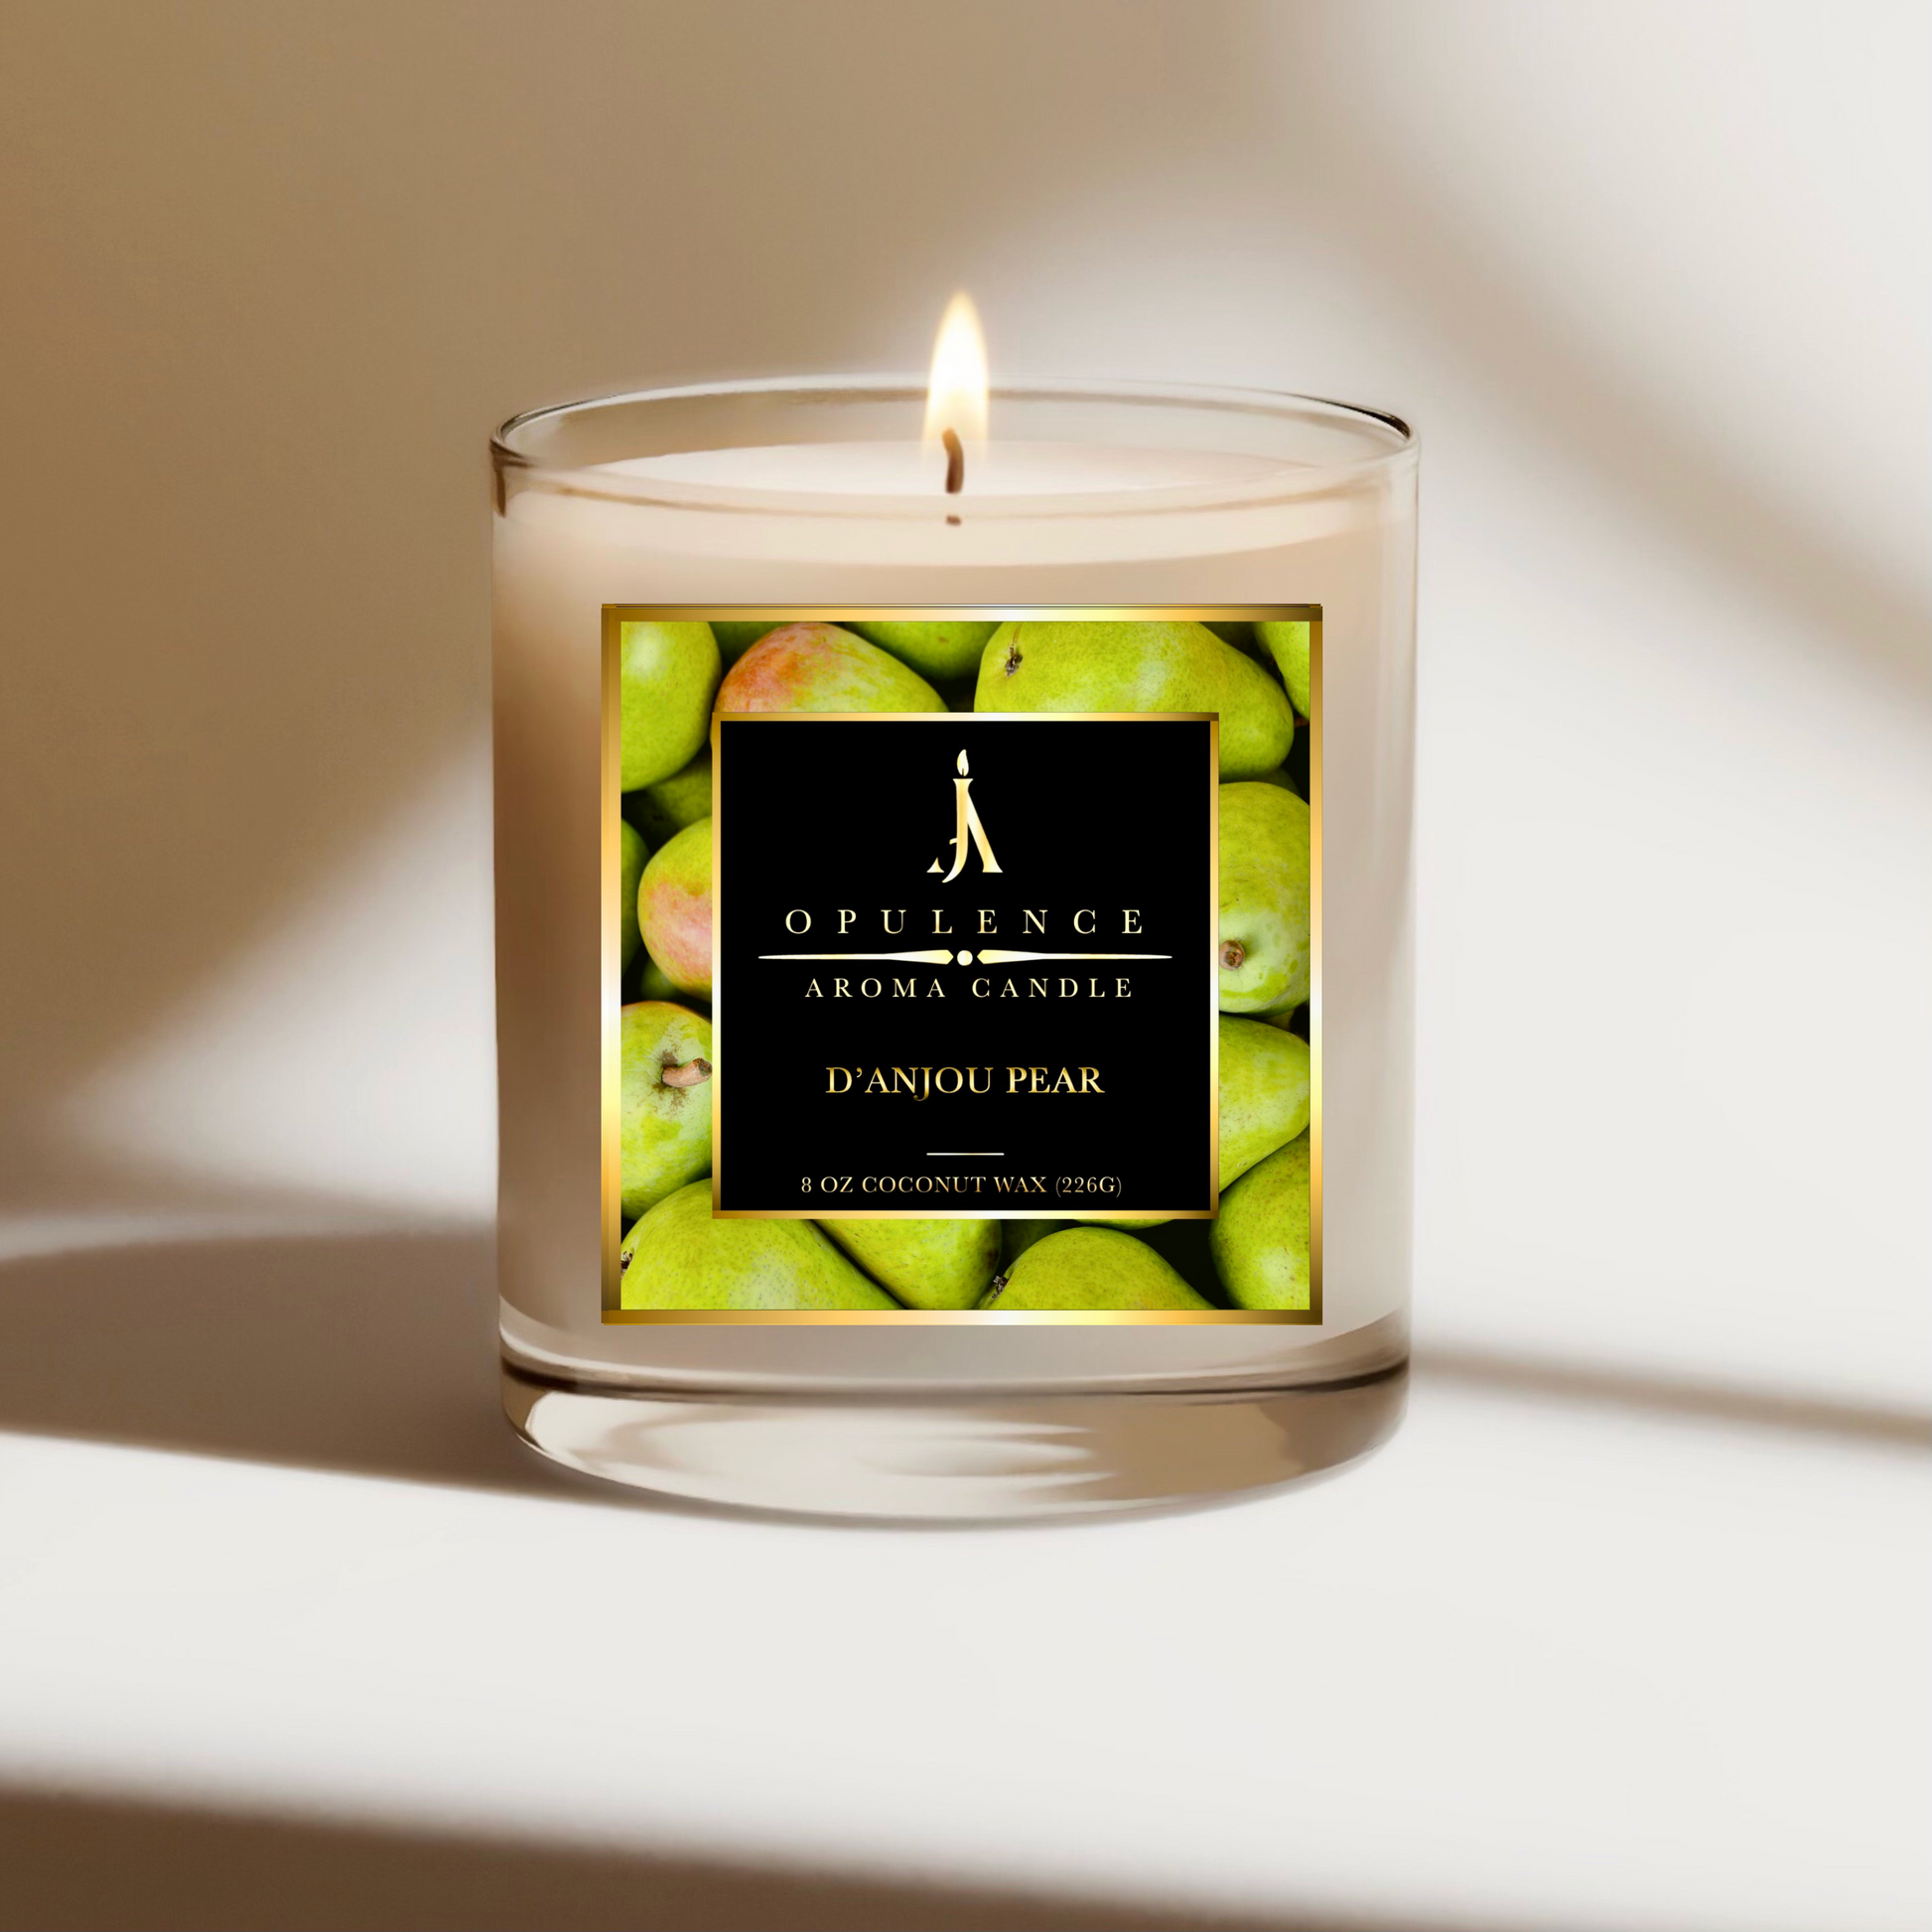 Pear scented candle with a wick lit